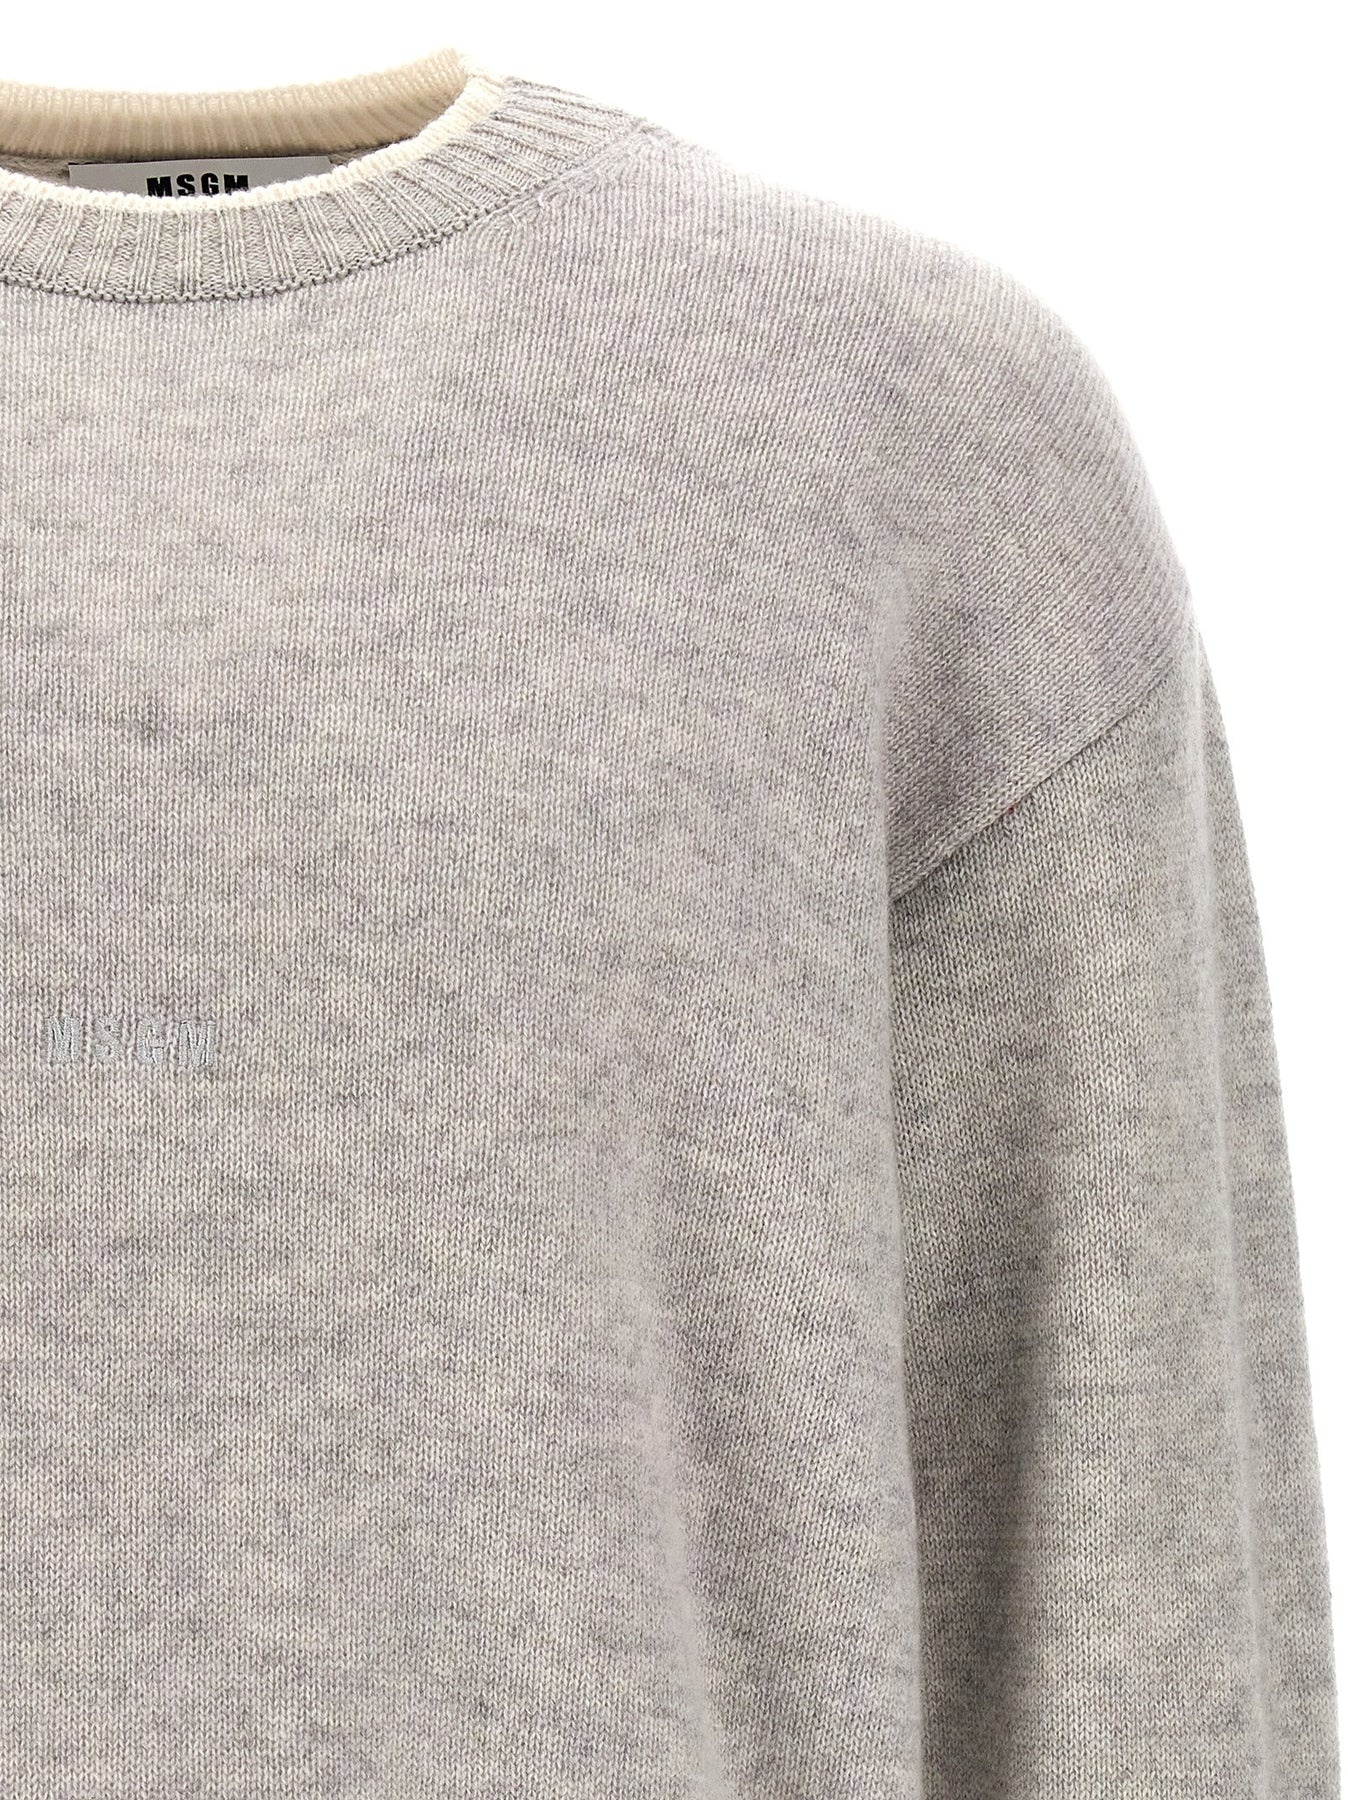 Logo Embroidery Sweater Sweater, Cardigans Gray - 3